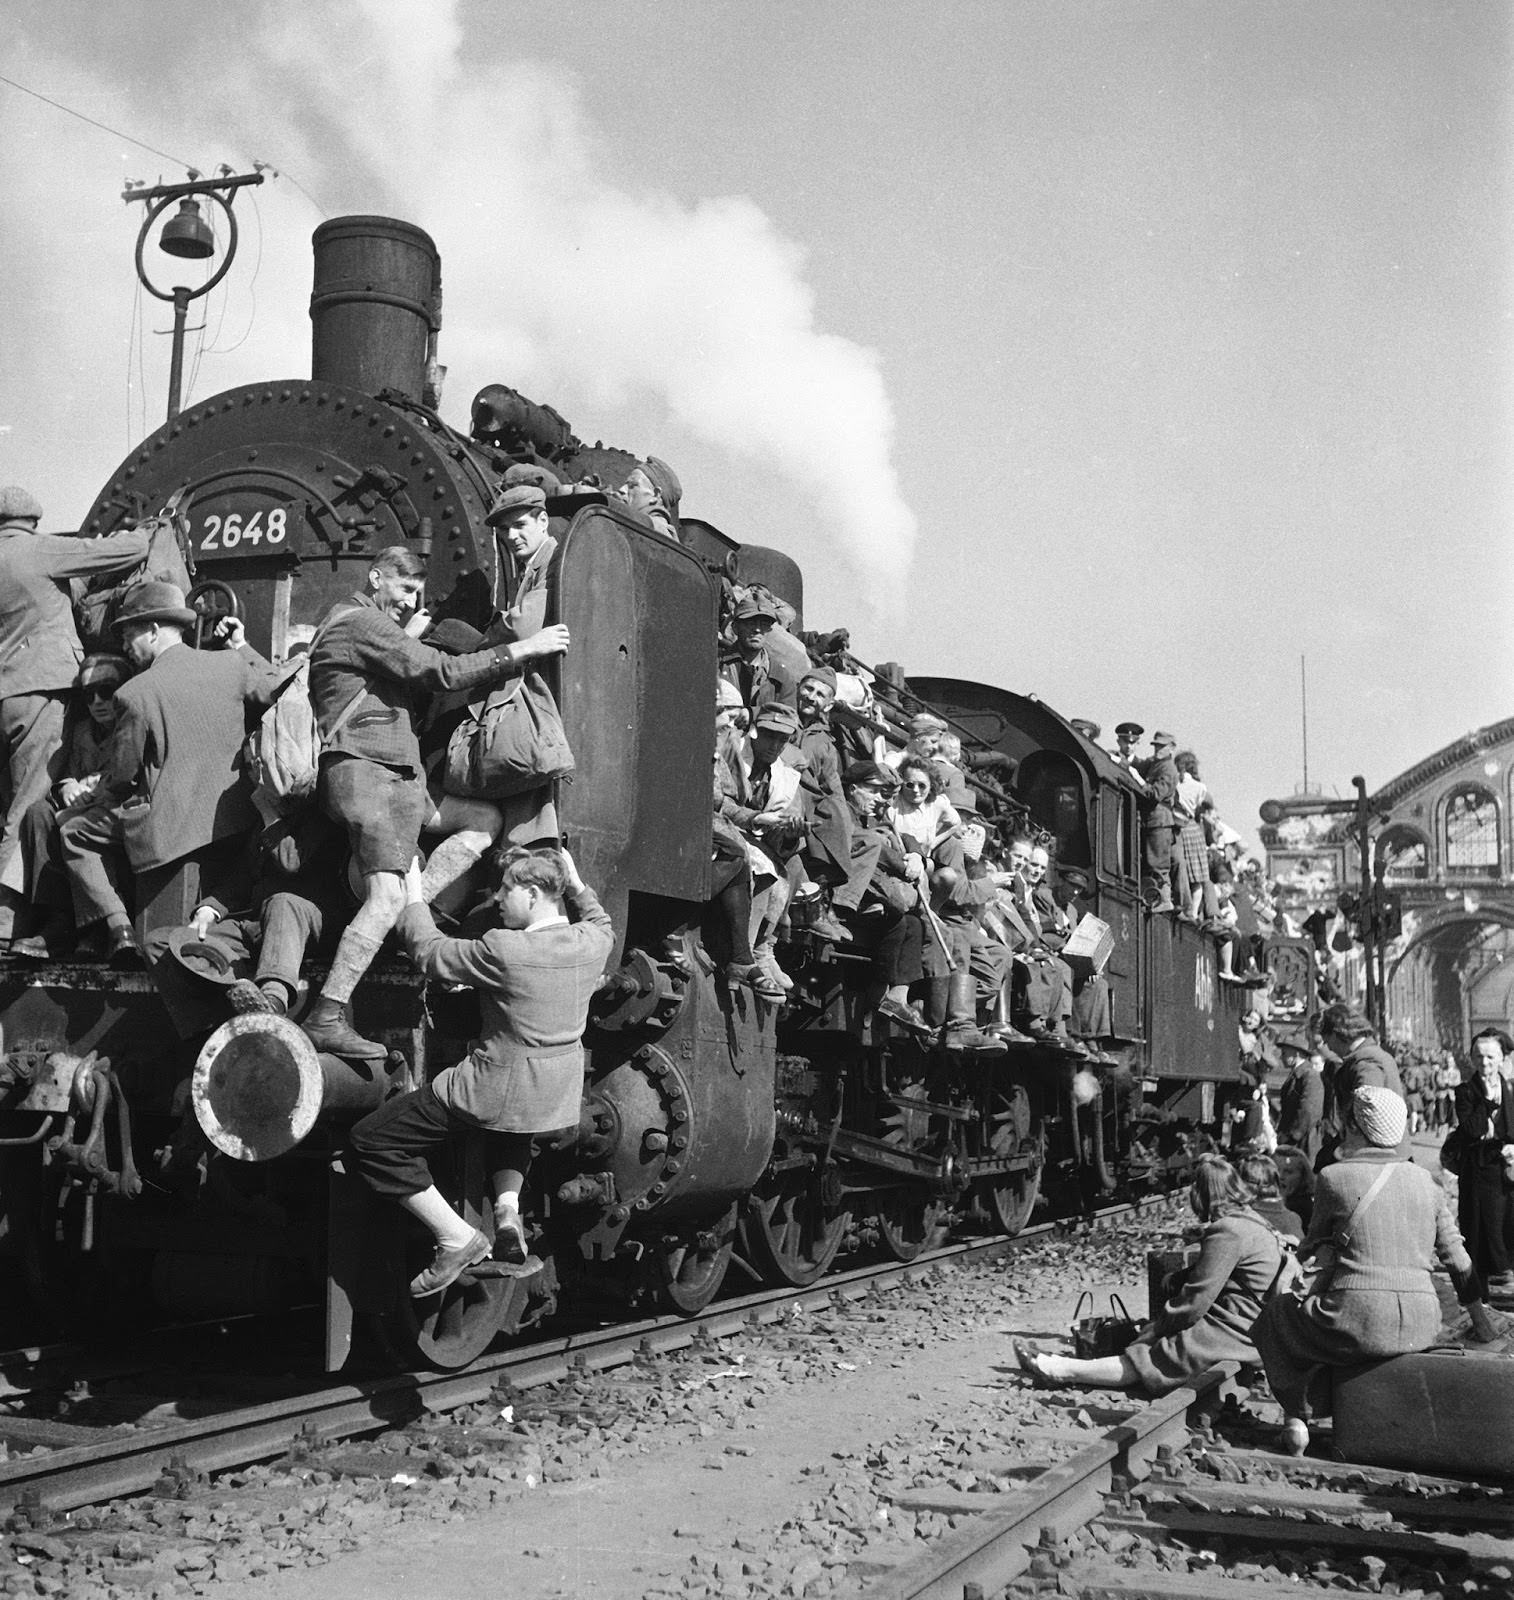 German refugees and displaced persons crowding every square inch of a train leaving Berlin after the war's end. 1945.